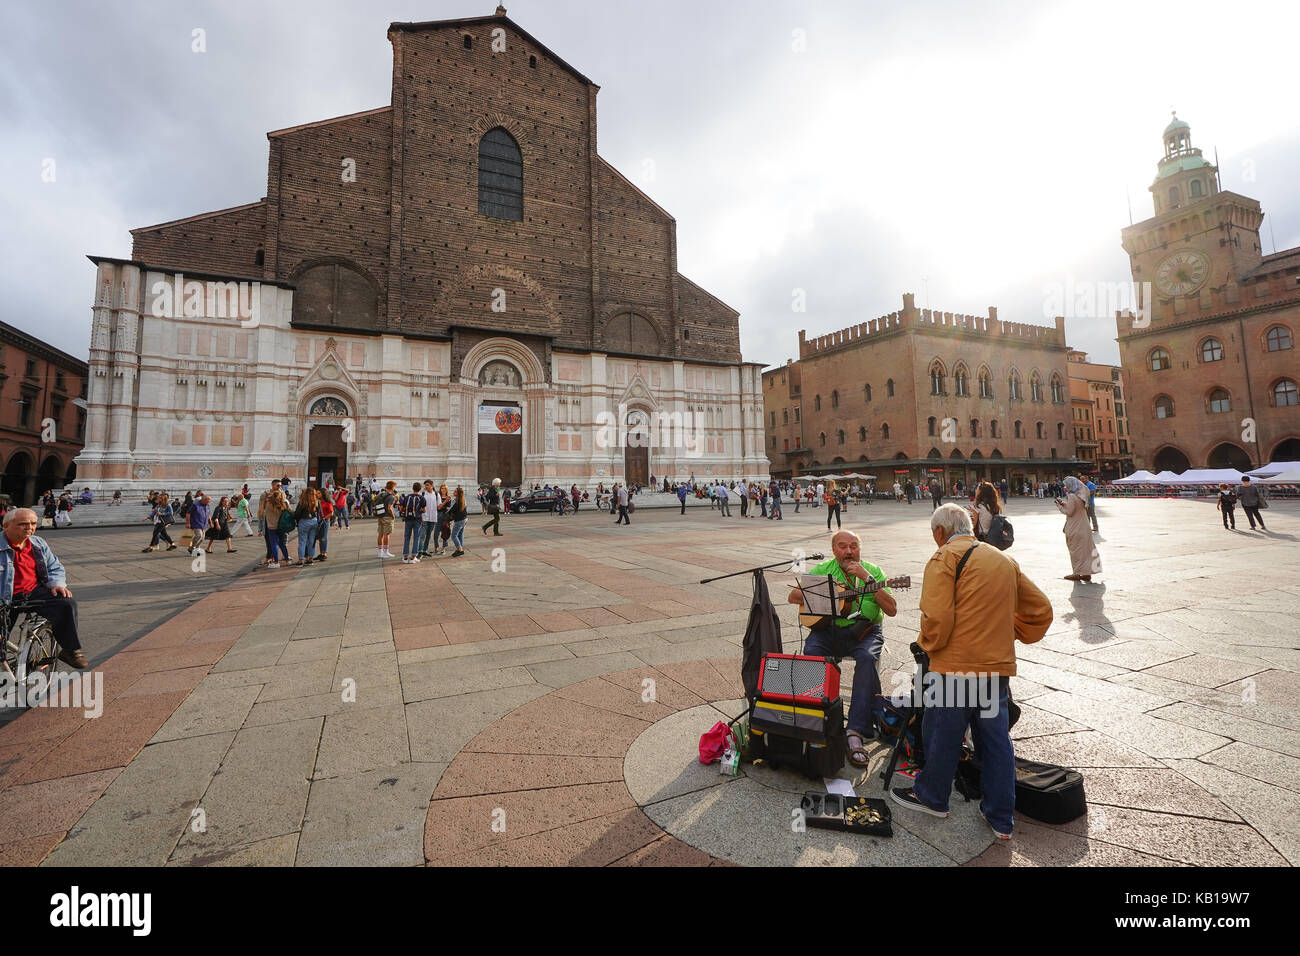 A general view of a busker on the Piazza Maggiore with the Basilica di San Petronio in Bologna. From a series of travel photos in Italy. Photo date: F Stock Photo